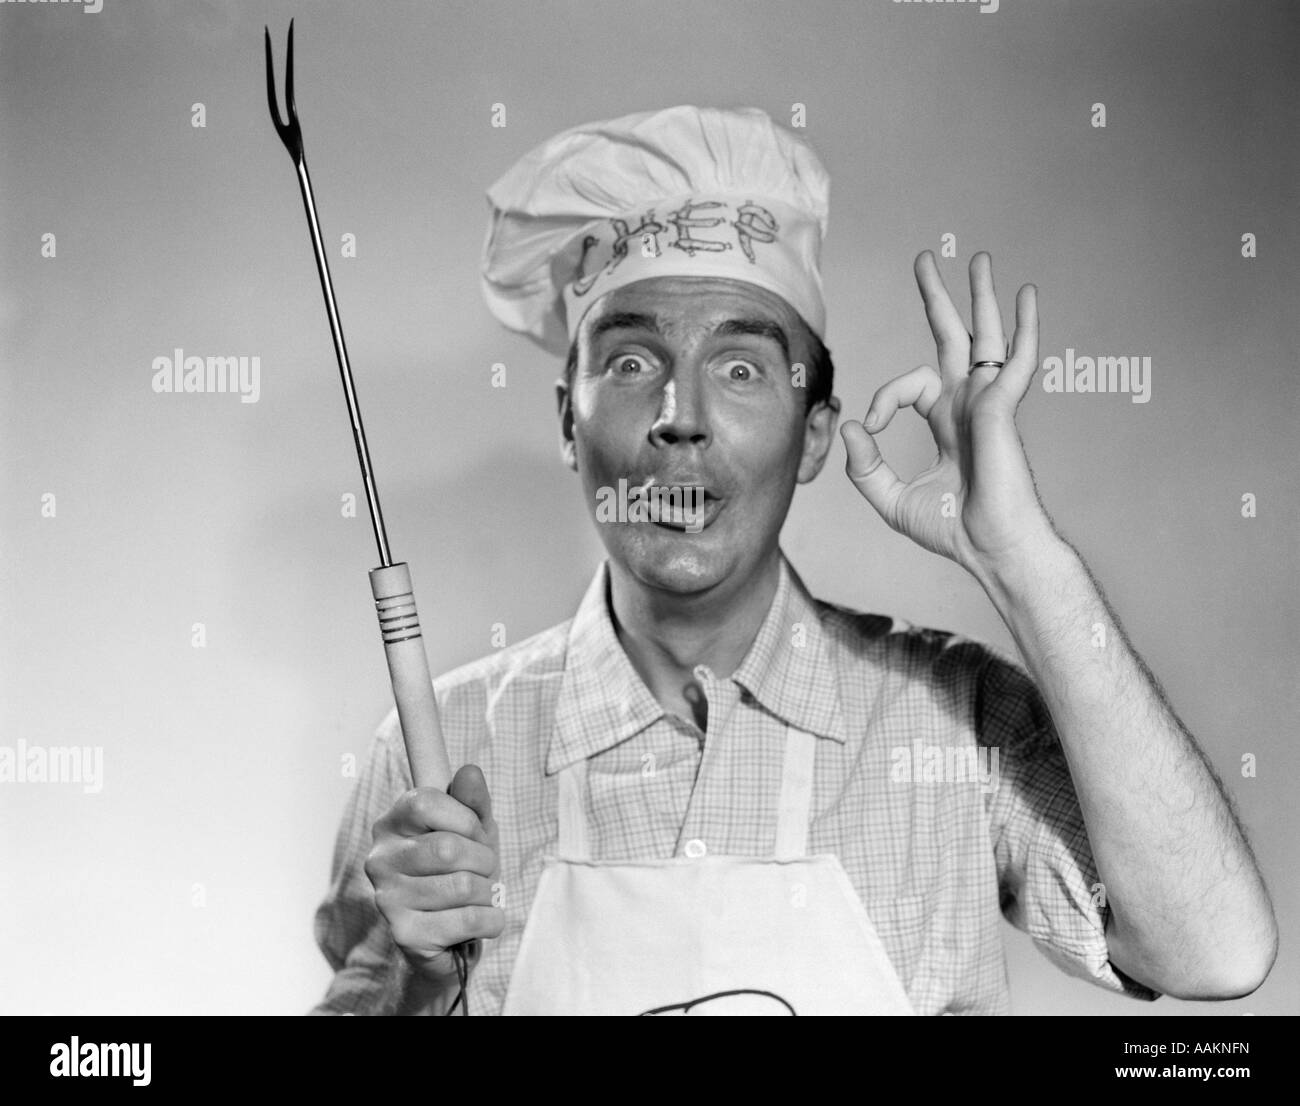 Années 1950 Années 1960 MAN WEARING HAT HOLDING CHEF CUISSON BARBECUE TABLIER FAIRE OKAY SIGN LOOKING AT CAMERA Banque D'Images